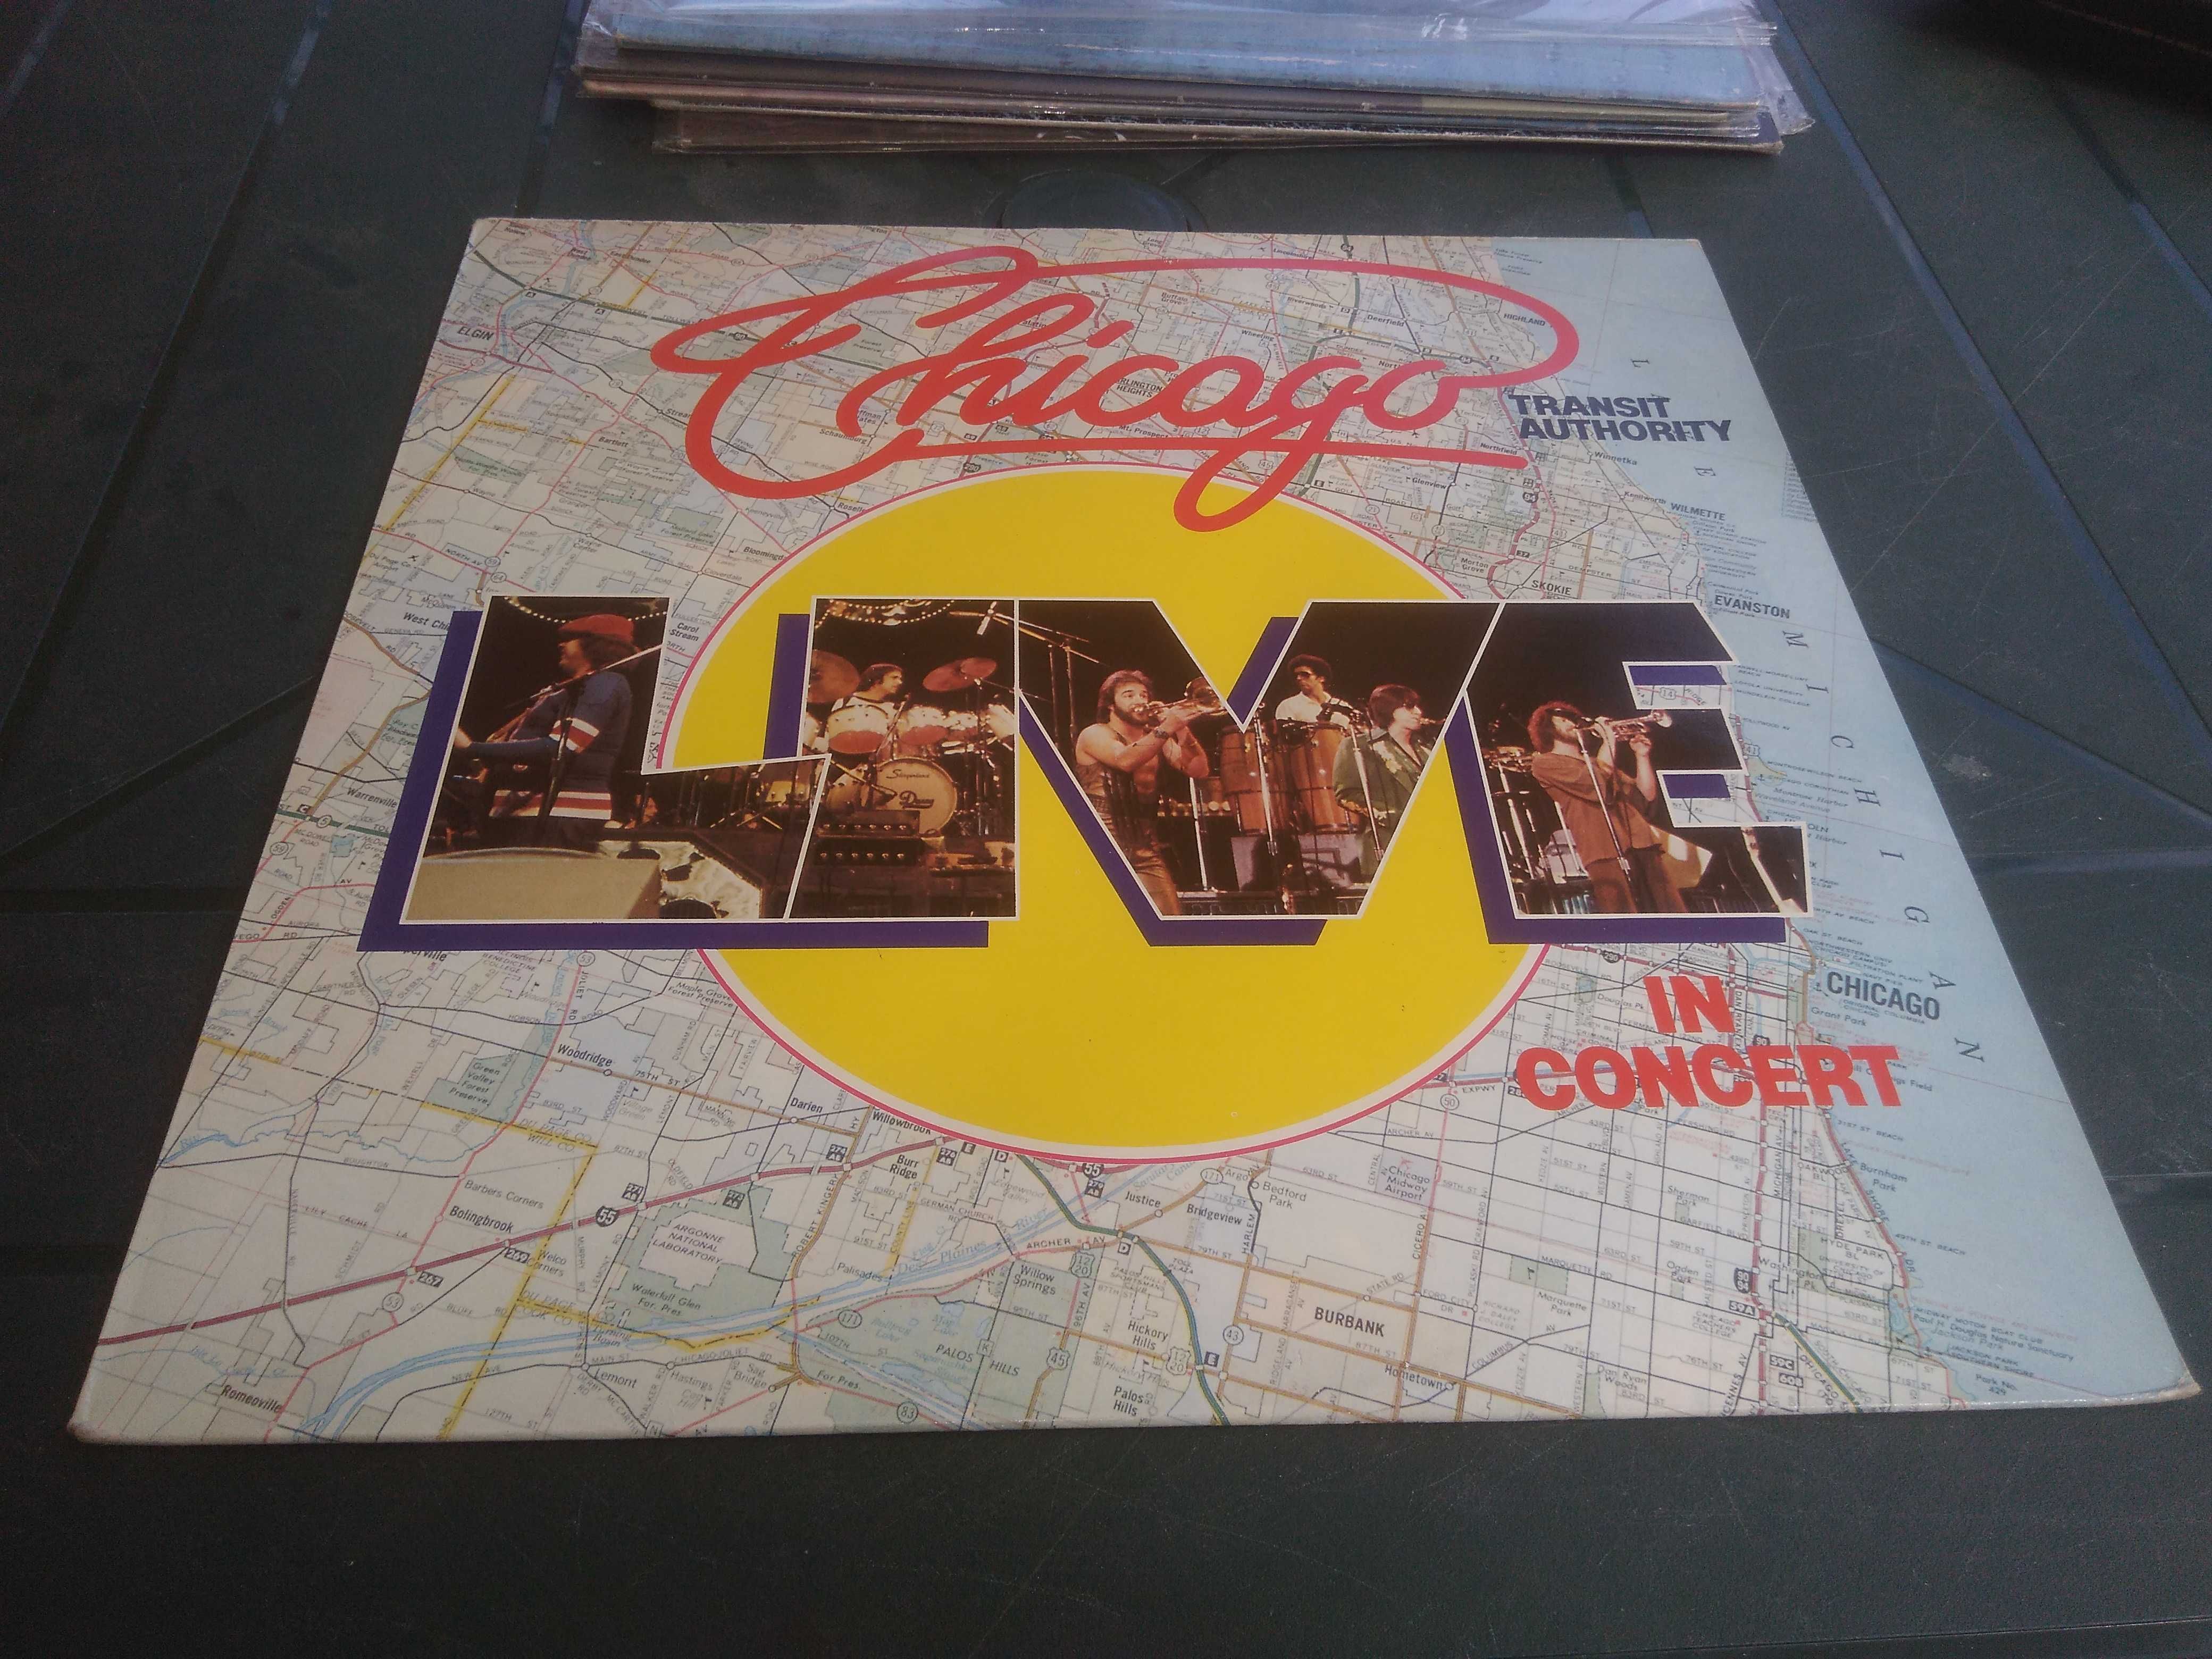 Chicago live in concert